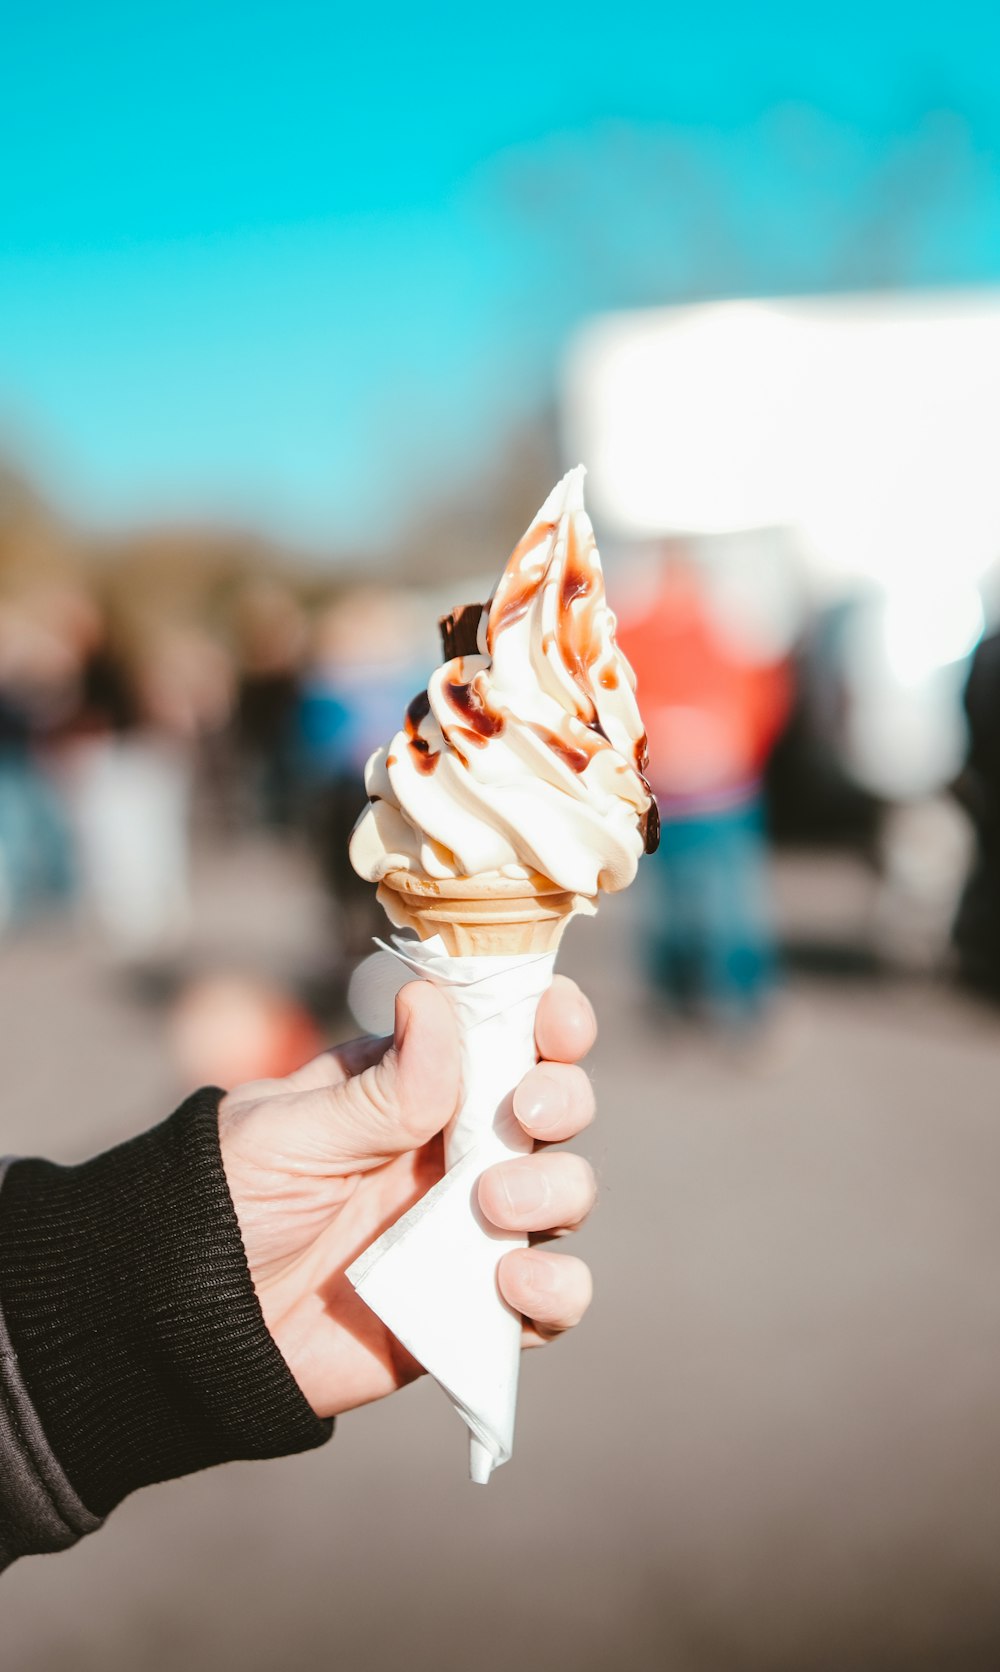 a person is holding an ice cream cone in their hand